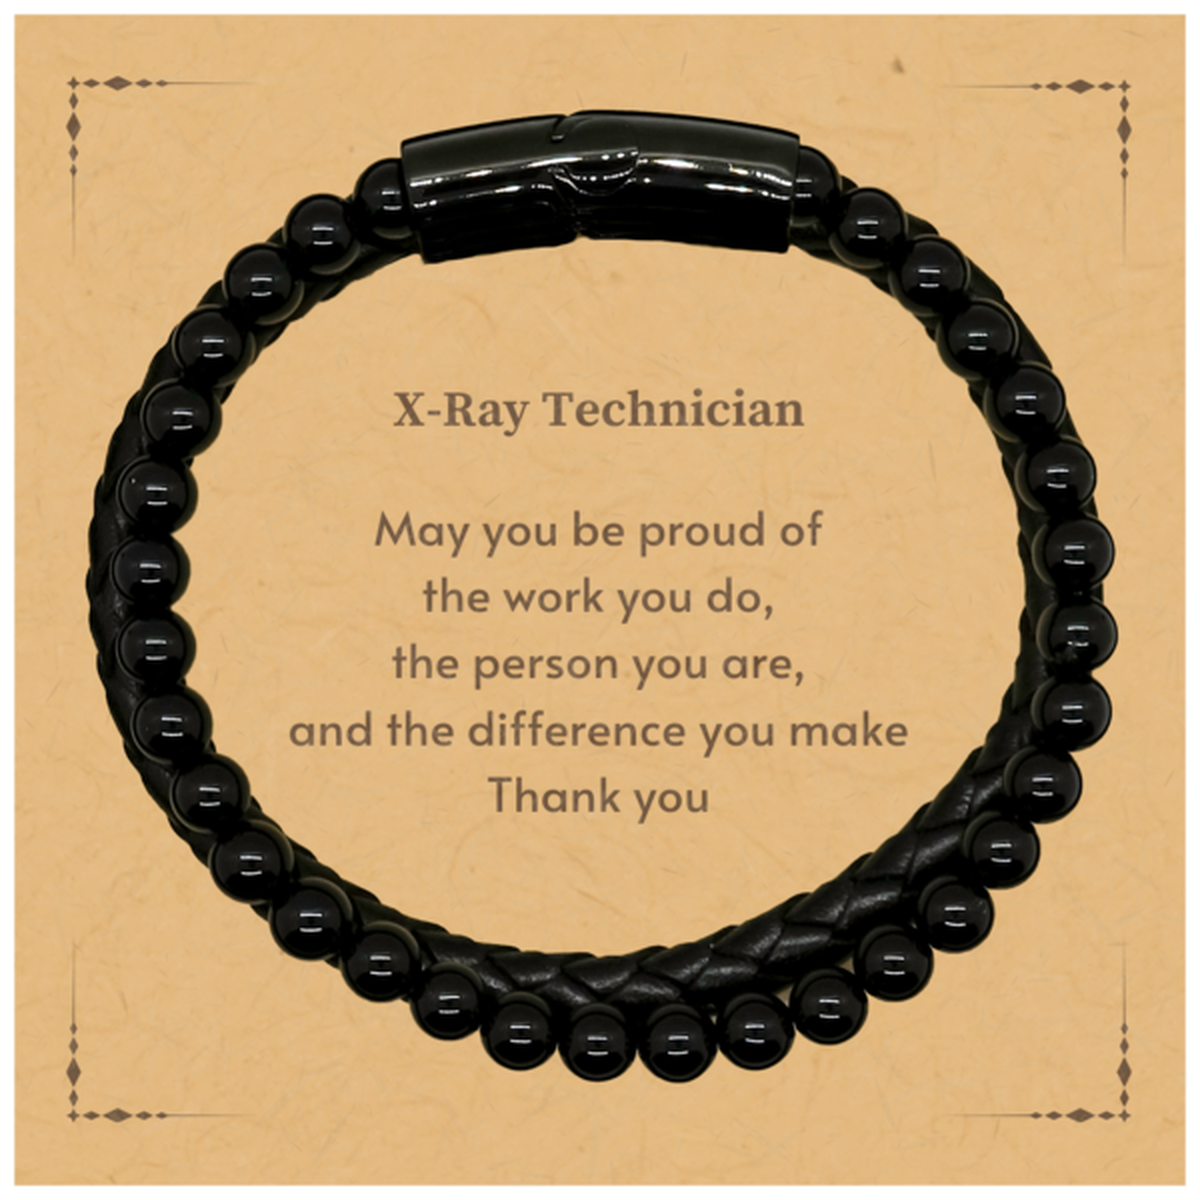 Heartwarming Stone Leather Bracelets Retirement Coworkers Gifts for X-Ray Technician, X-Ray Technician May You be proud of the work you do, the person you are Gifts for Boss Men Women Friends